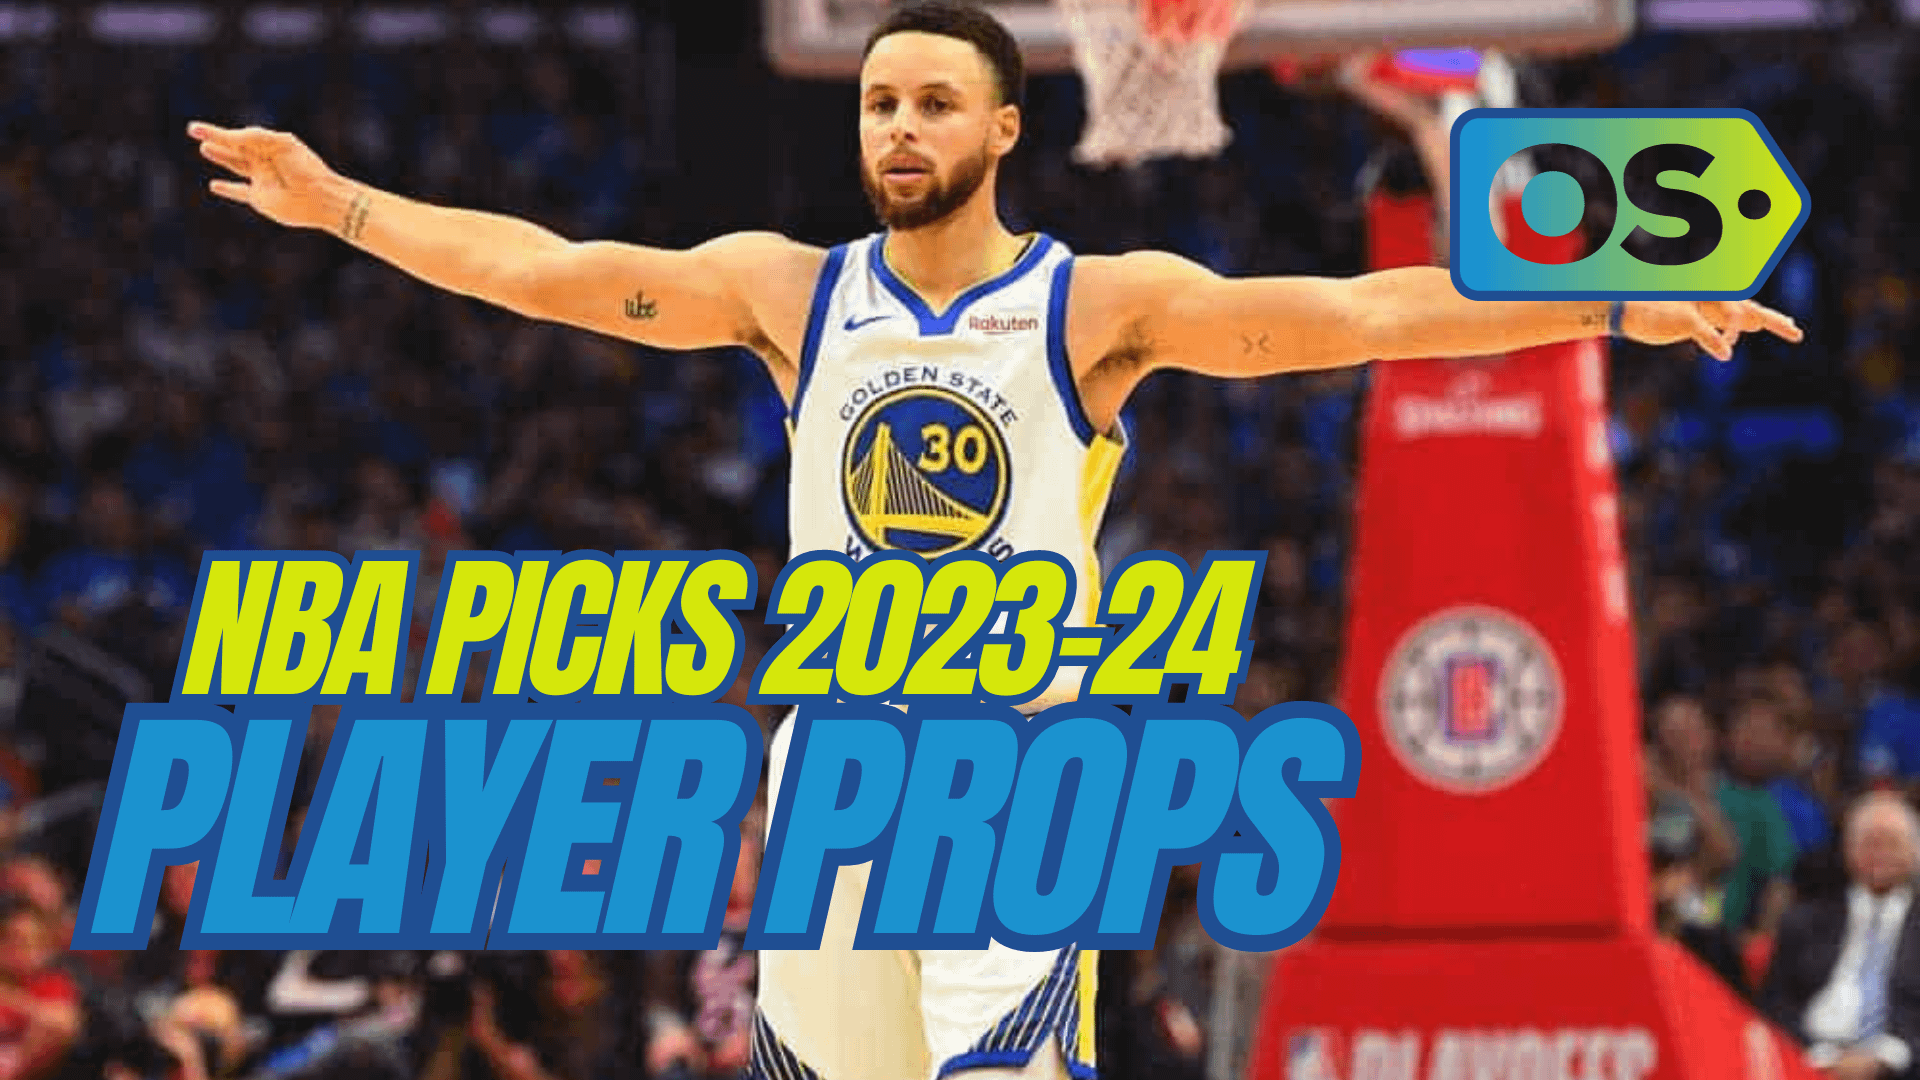 The best NBA player prop bets and picks today for Thursday, February 15, include wagers on Stephen Curry and Deandre Ayton.